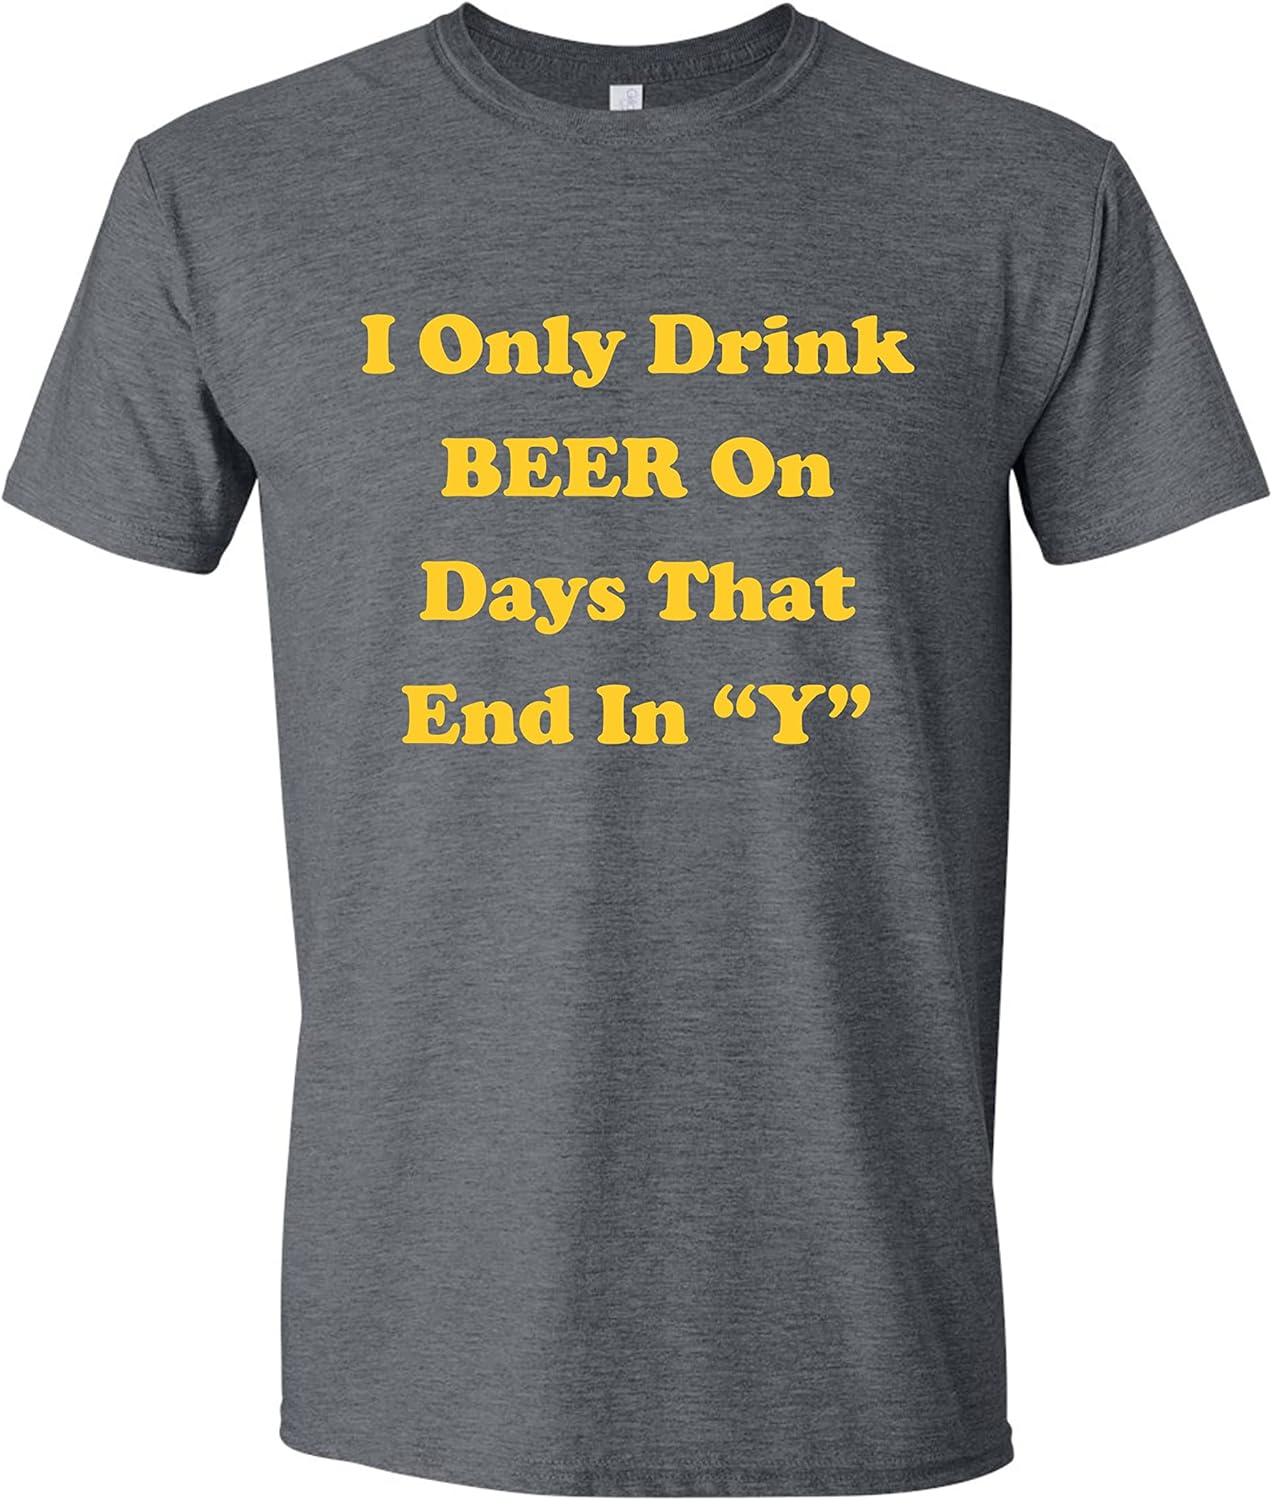 I Only Drink Beer On Days That End in Y T-Shirt